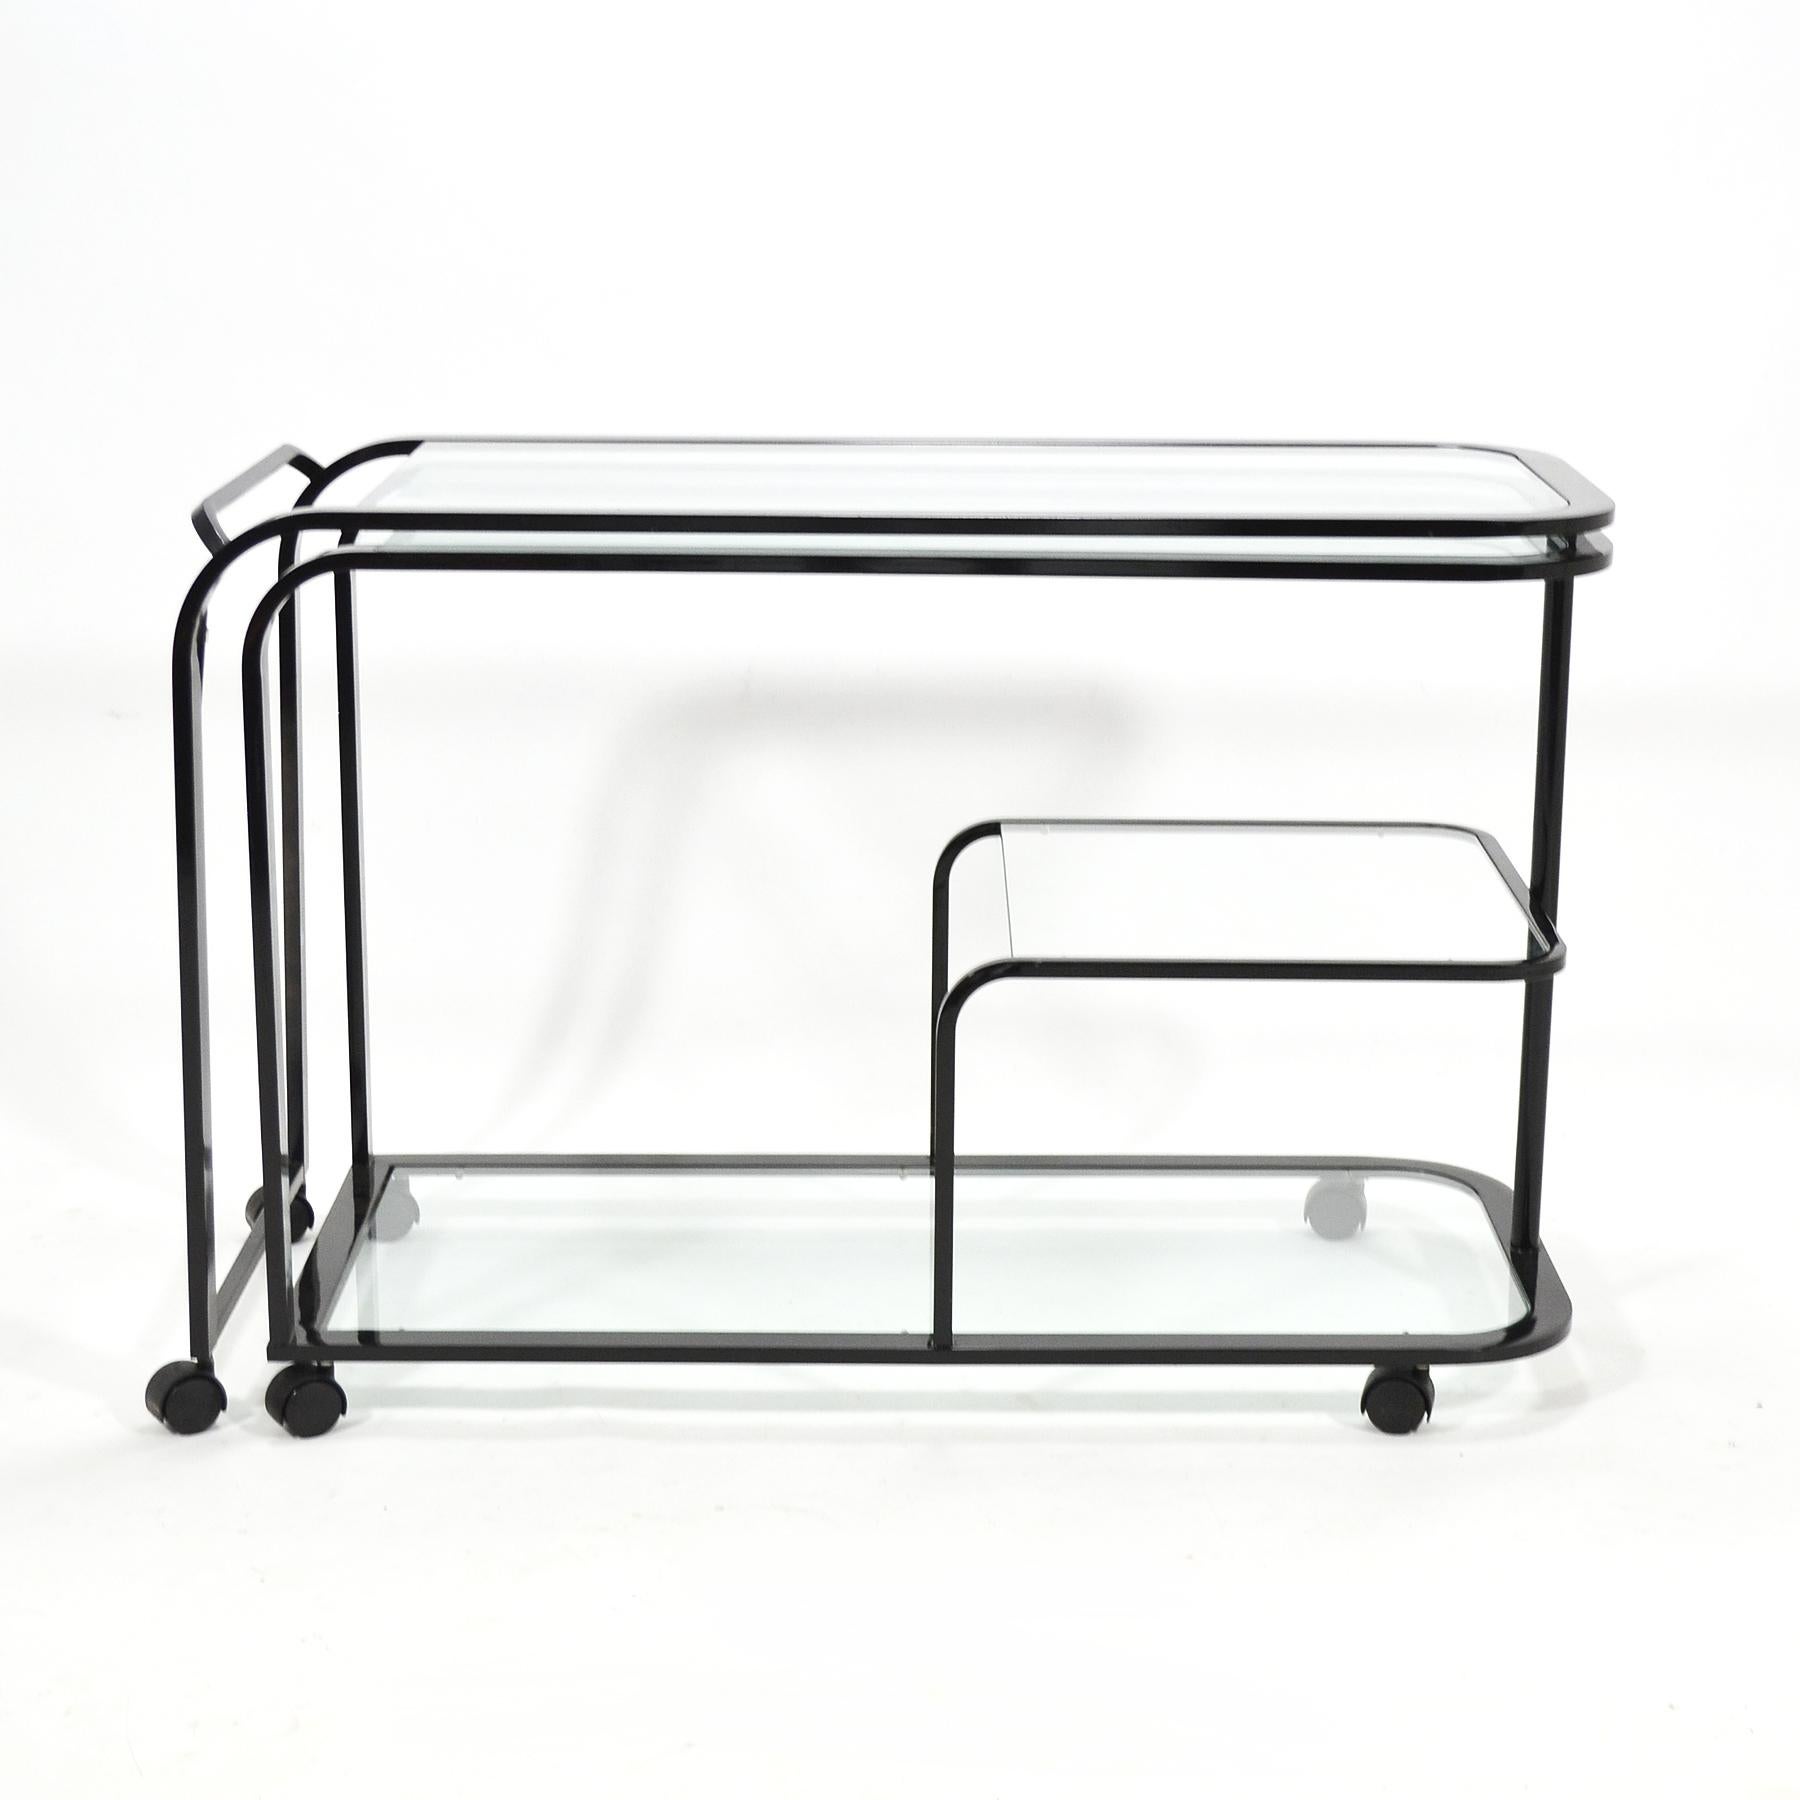 Painted Expandable Bar or Serving Cart by D.I.A.